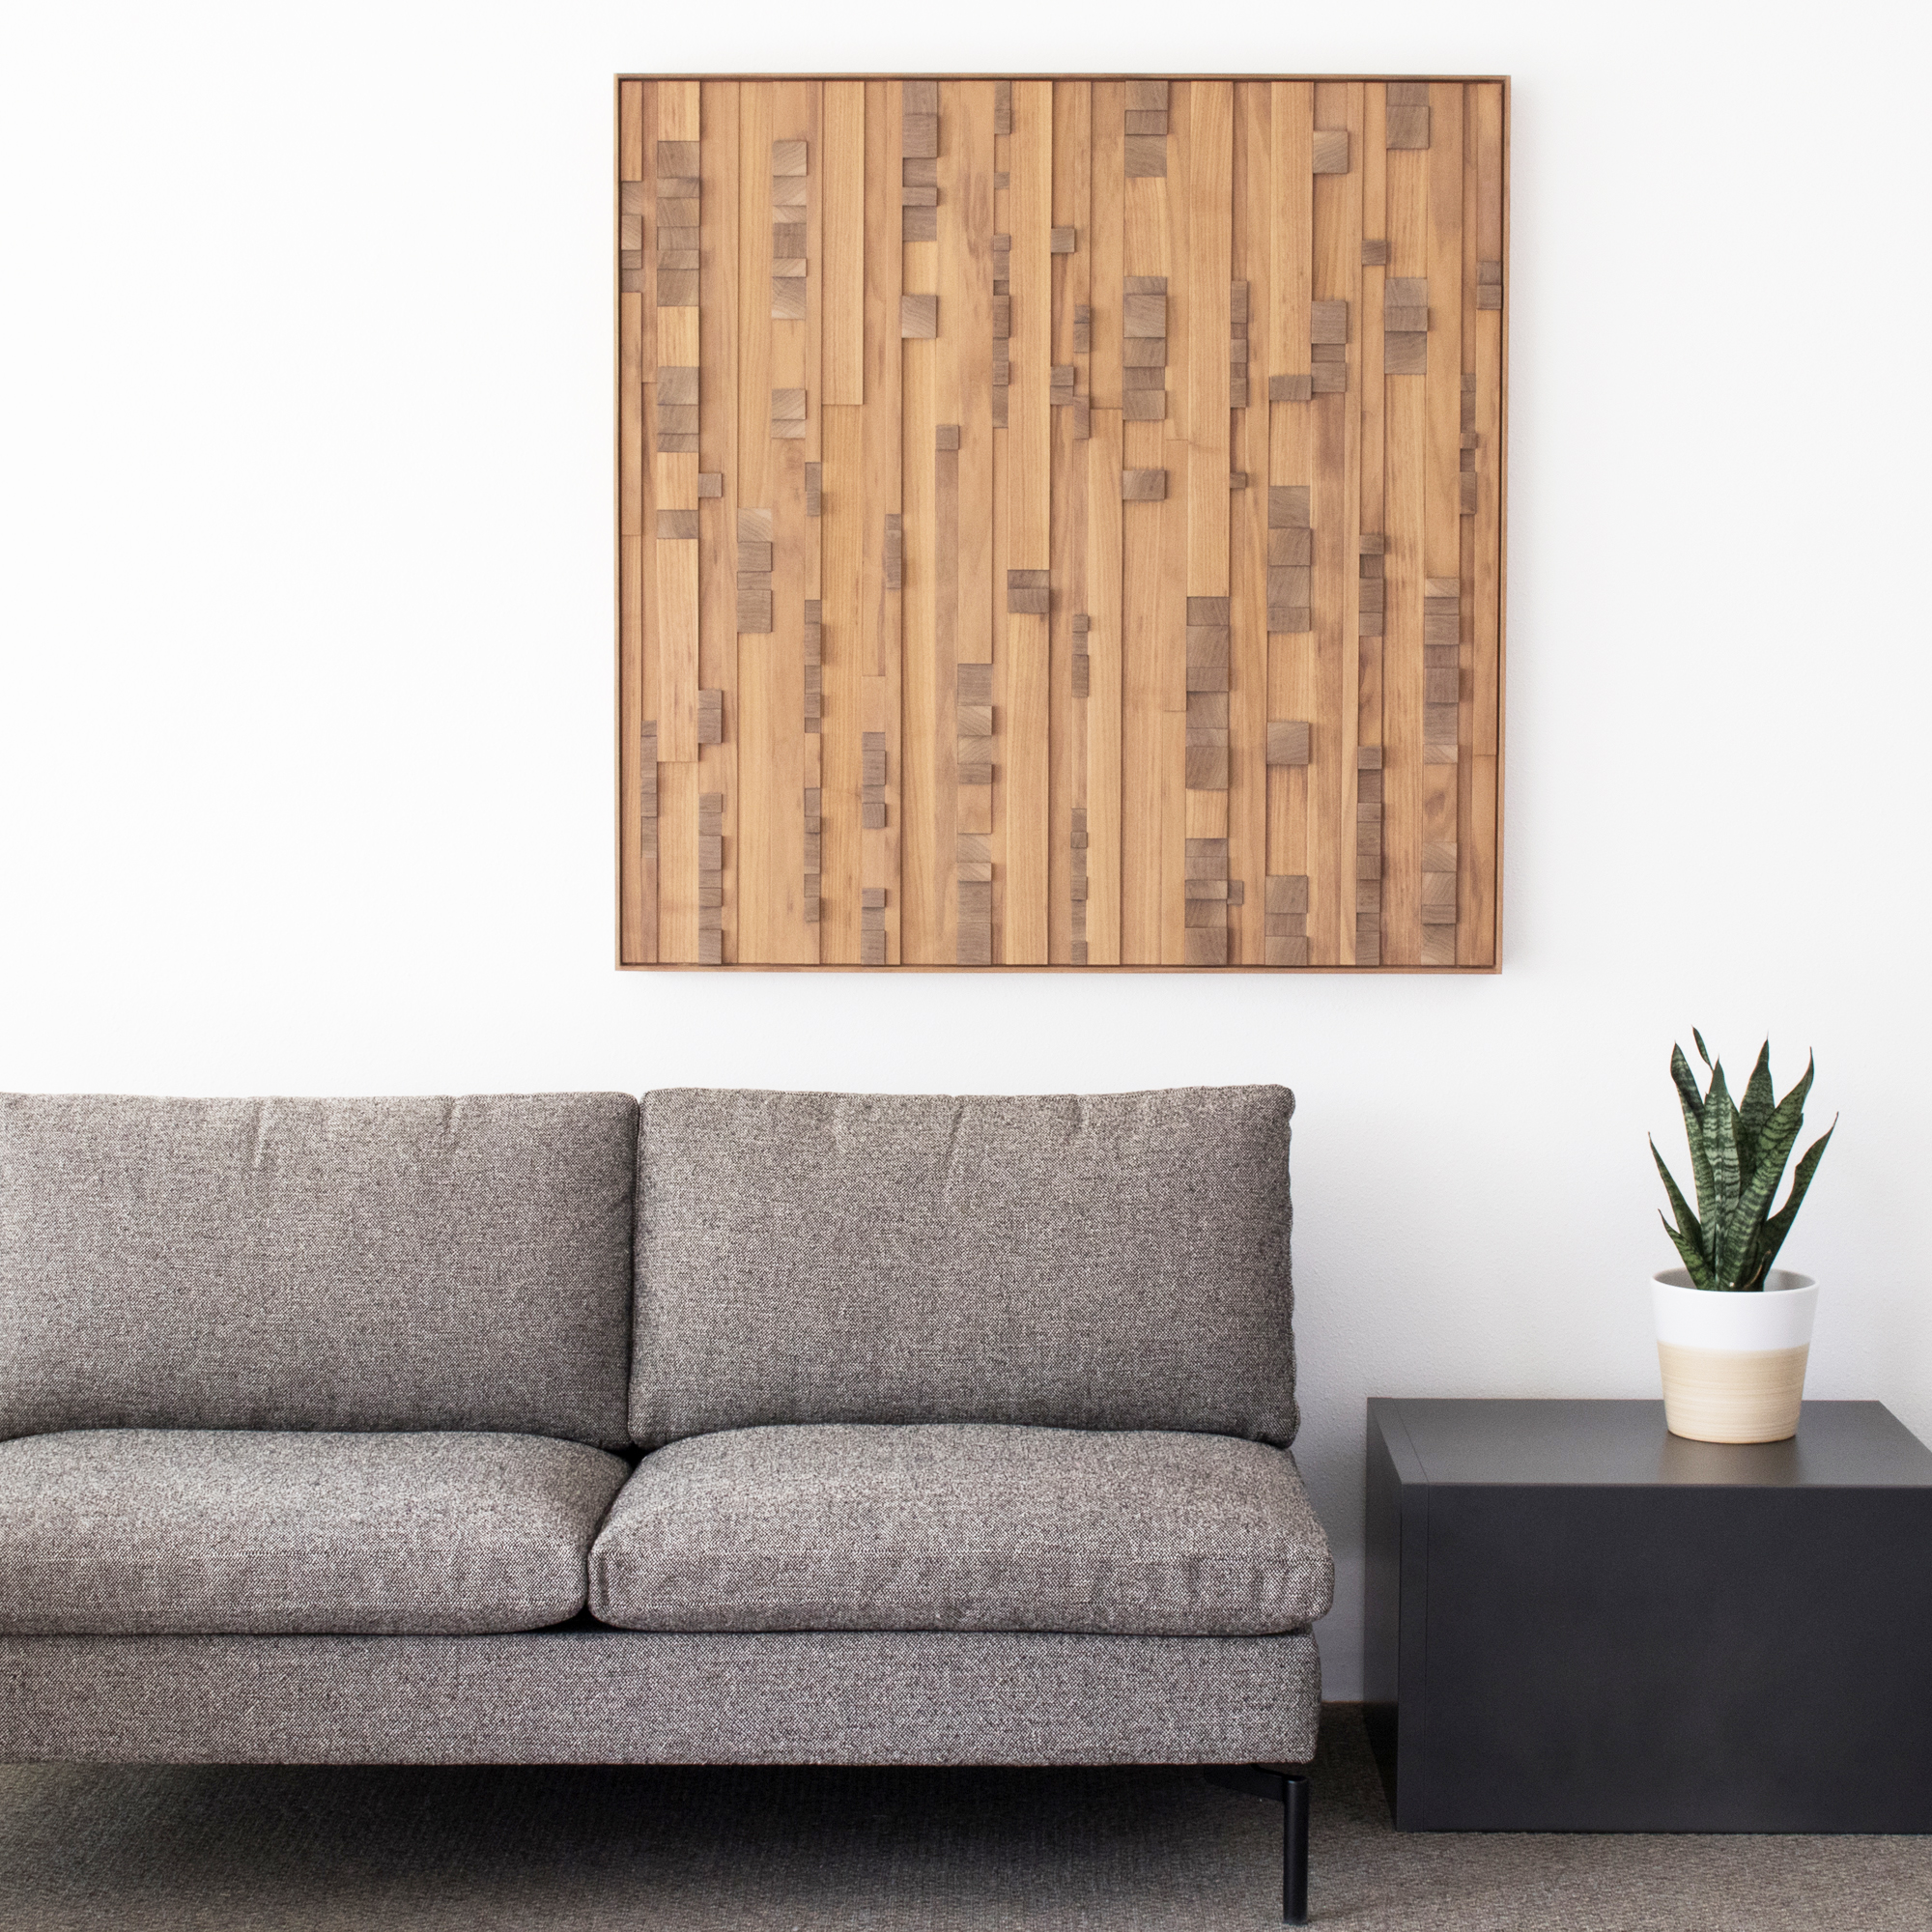 Square wood wall panel in a home setting